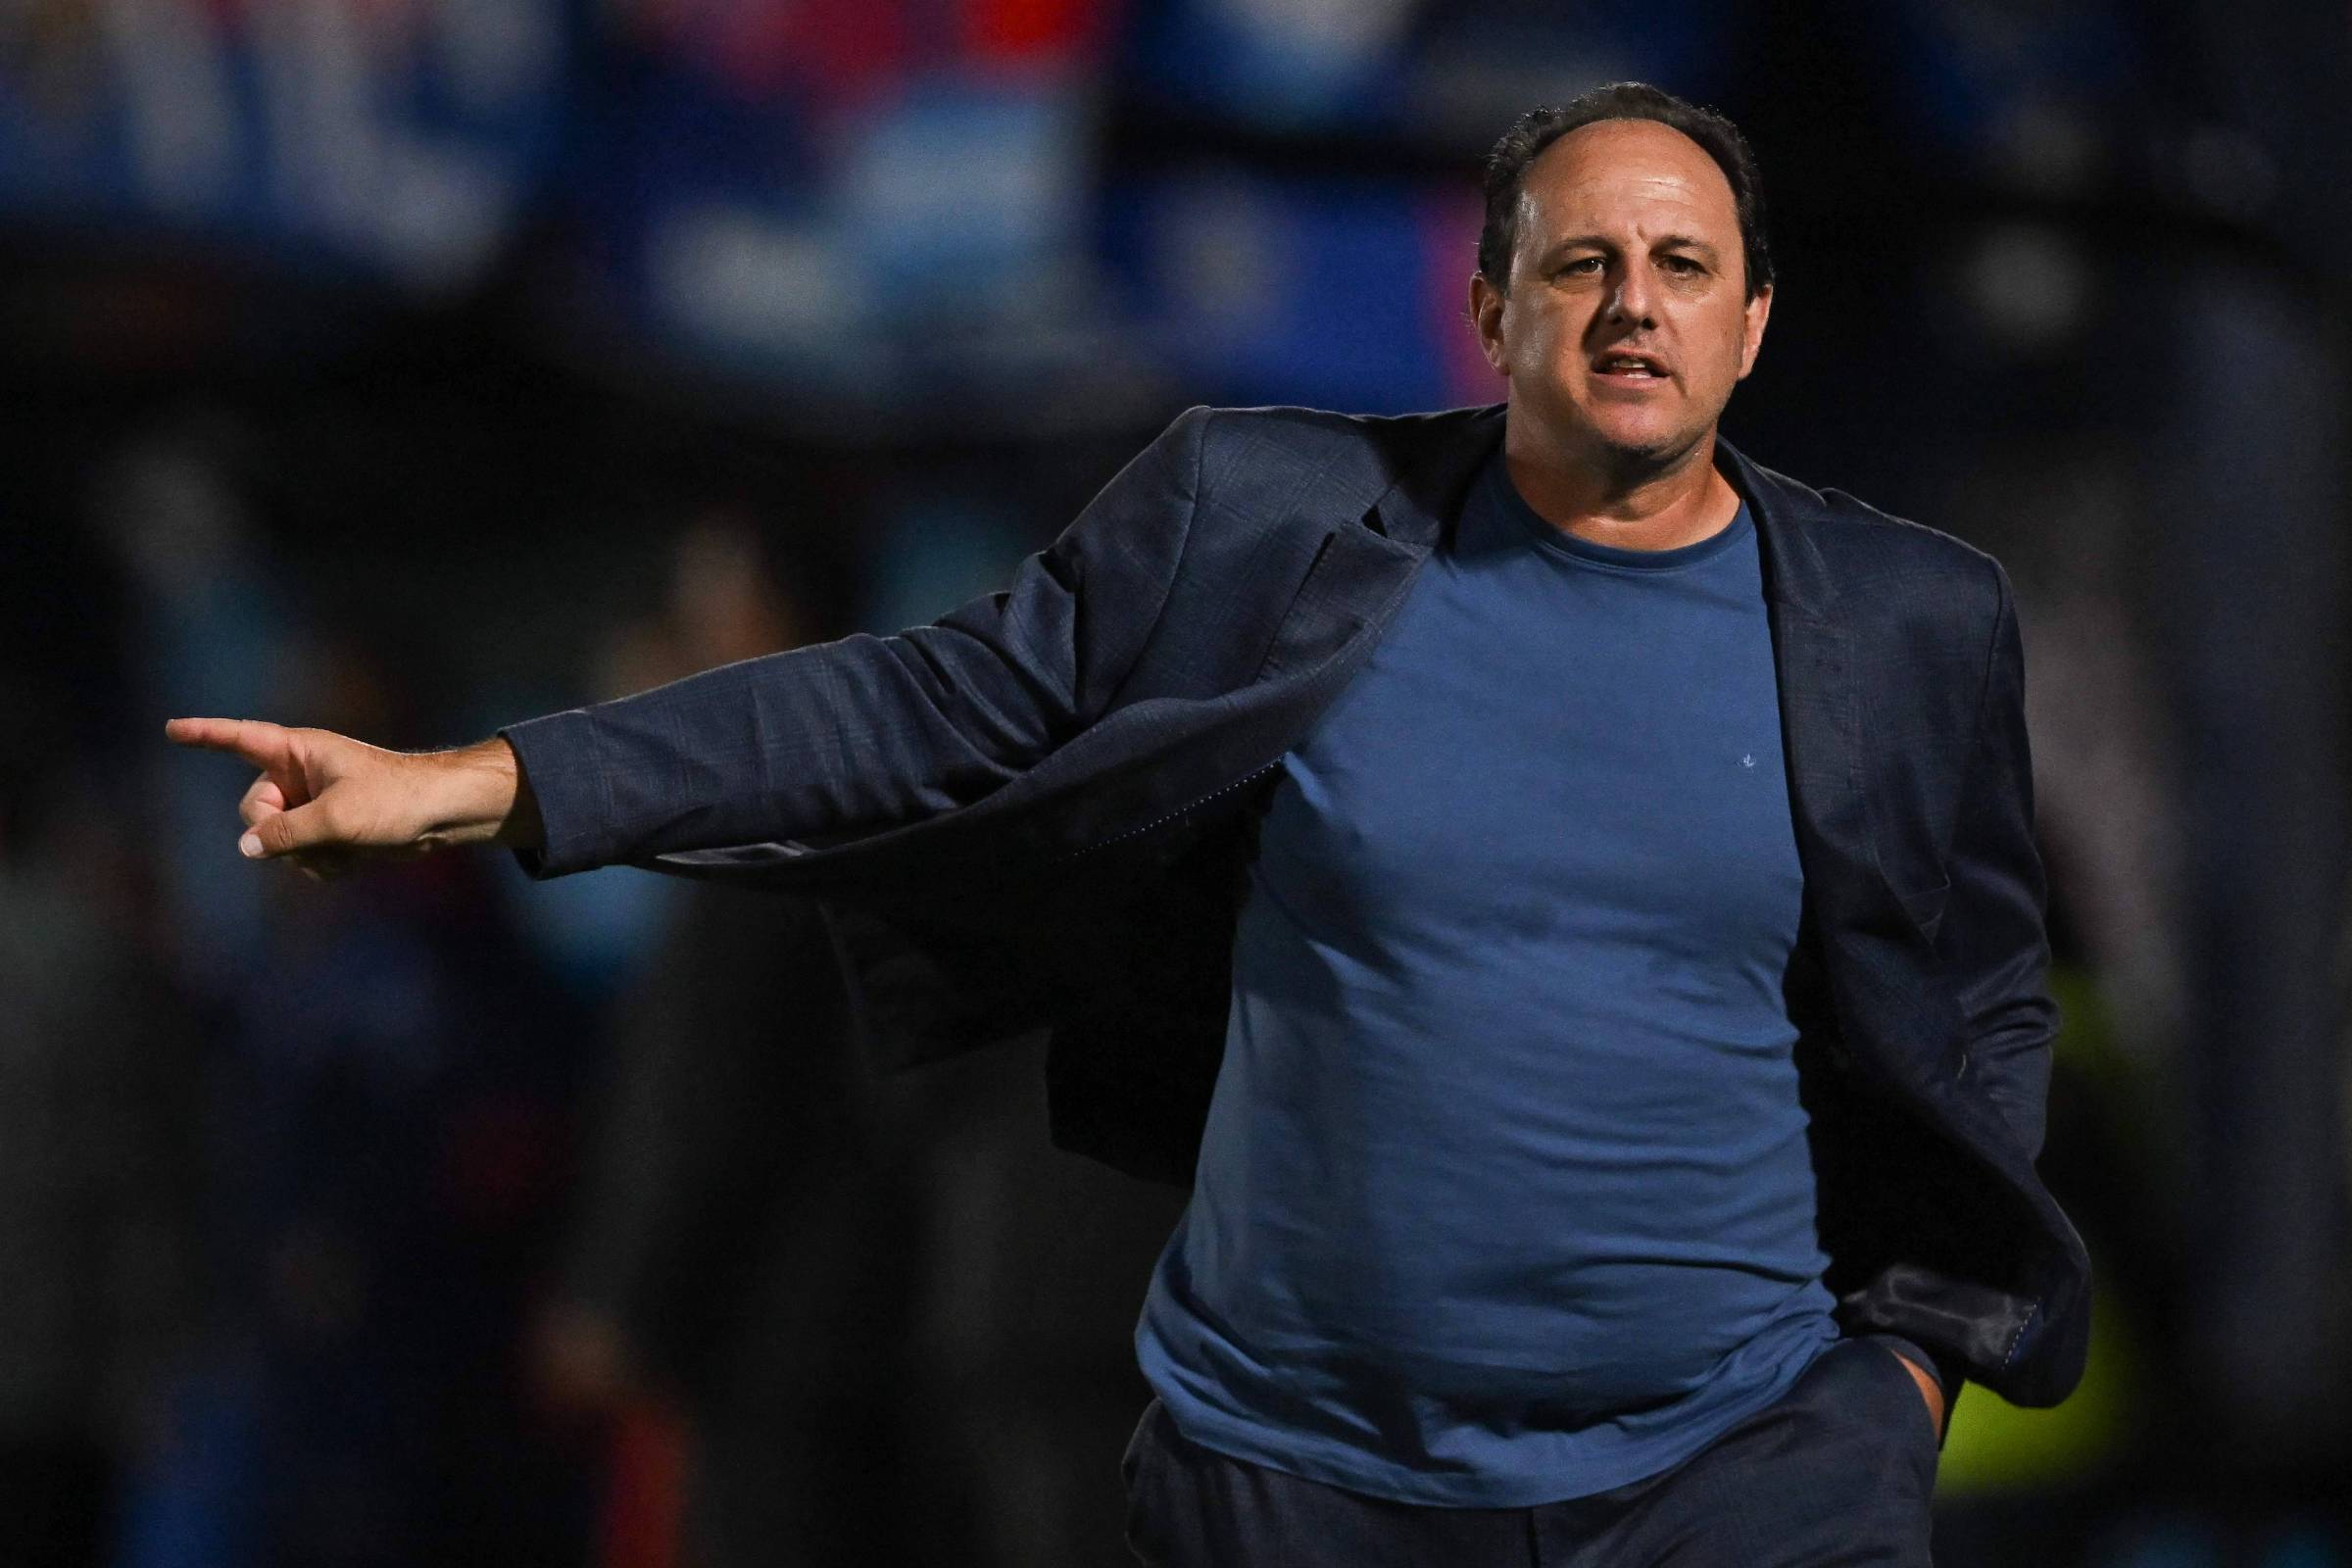 Rogério Ceni is Bahia’s new coach, with a contract until 2025